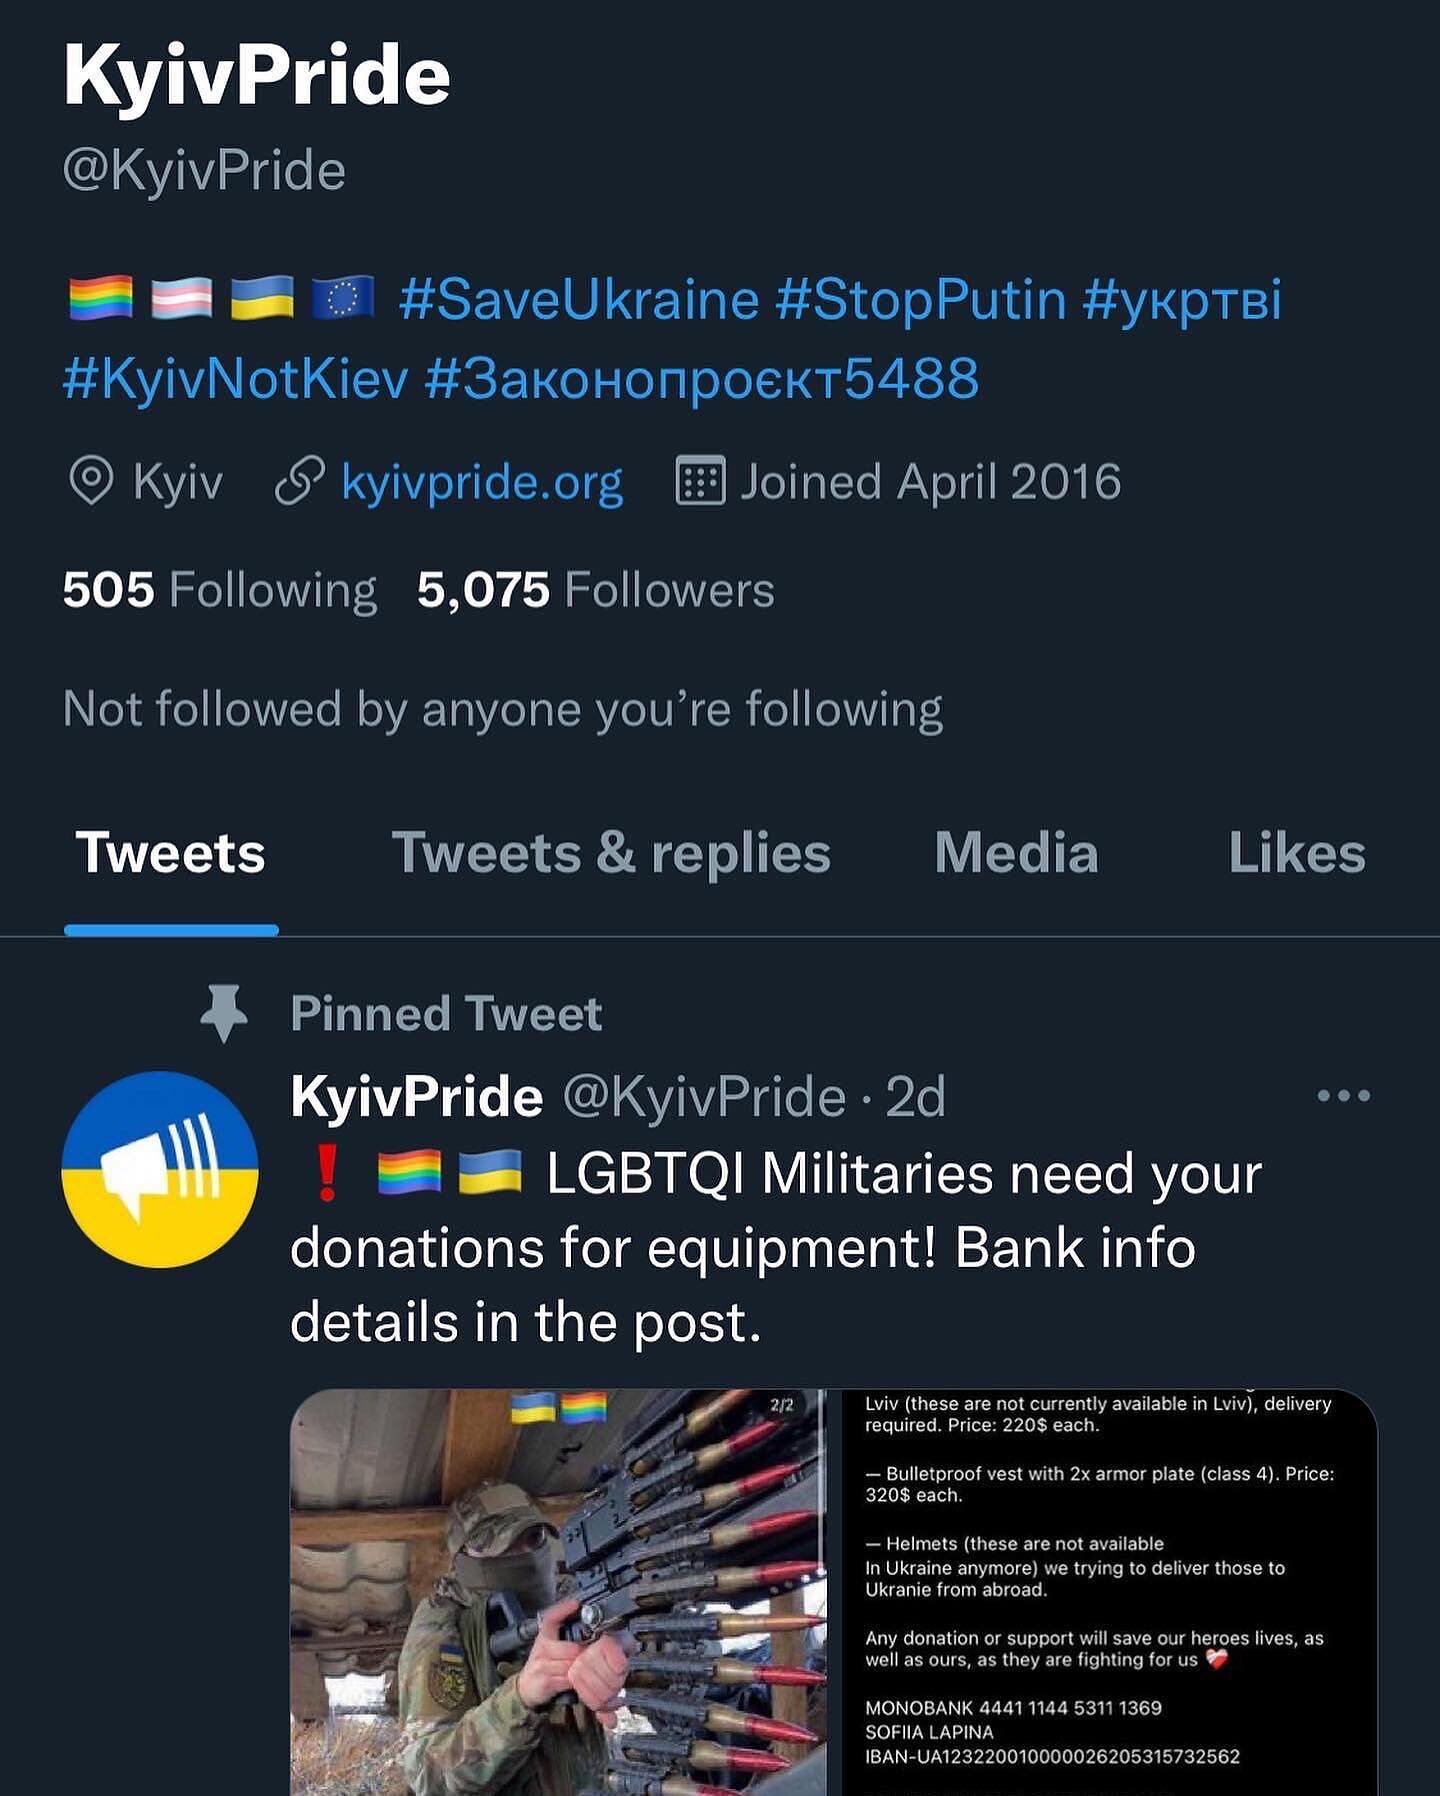 Hi all, Ukraine&rsquo;s vulnerable LGBTQ people need your support more than ever. Please see a link in my bio where you can help.